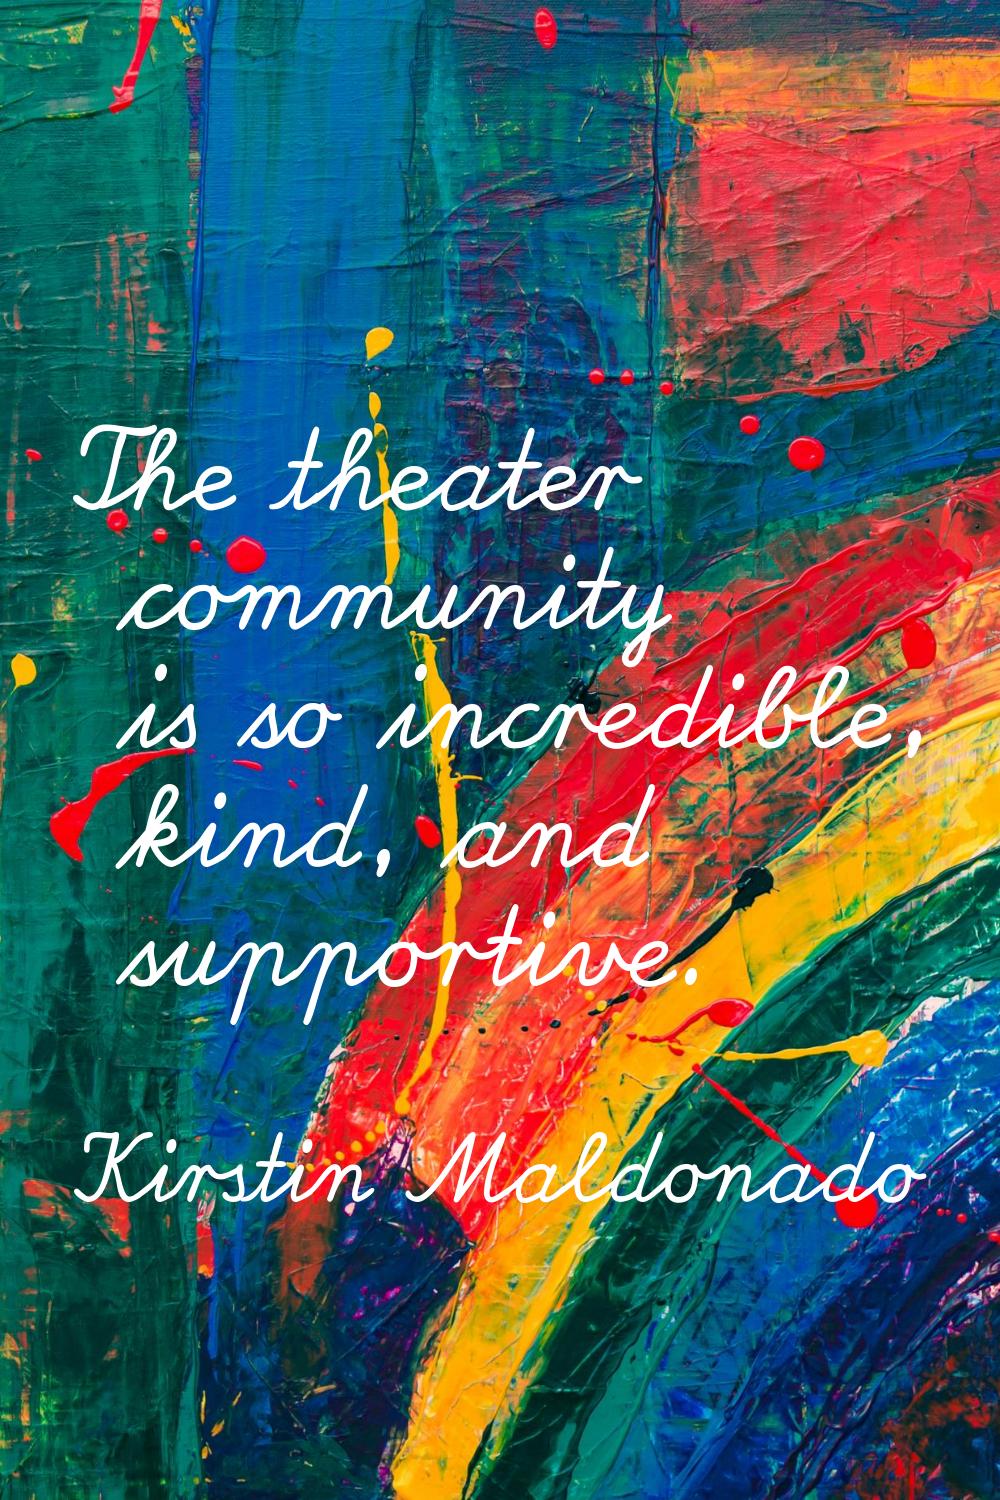 The theater community is so incredible, kind, and supportive.